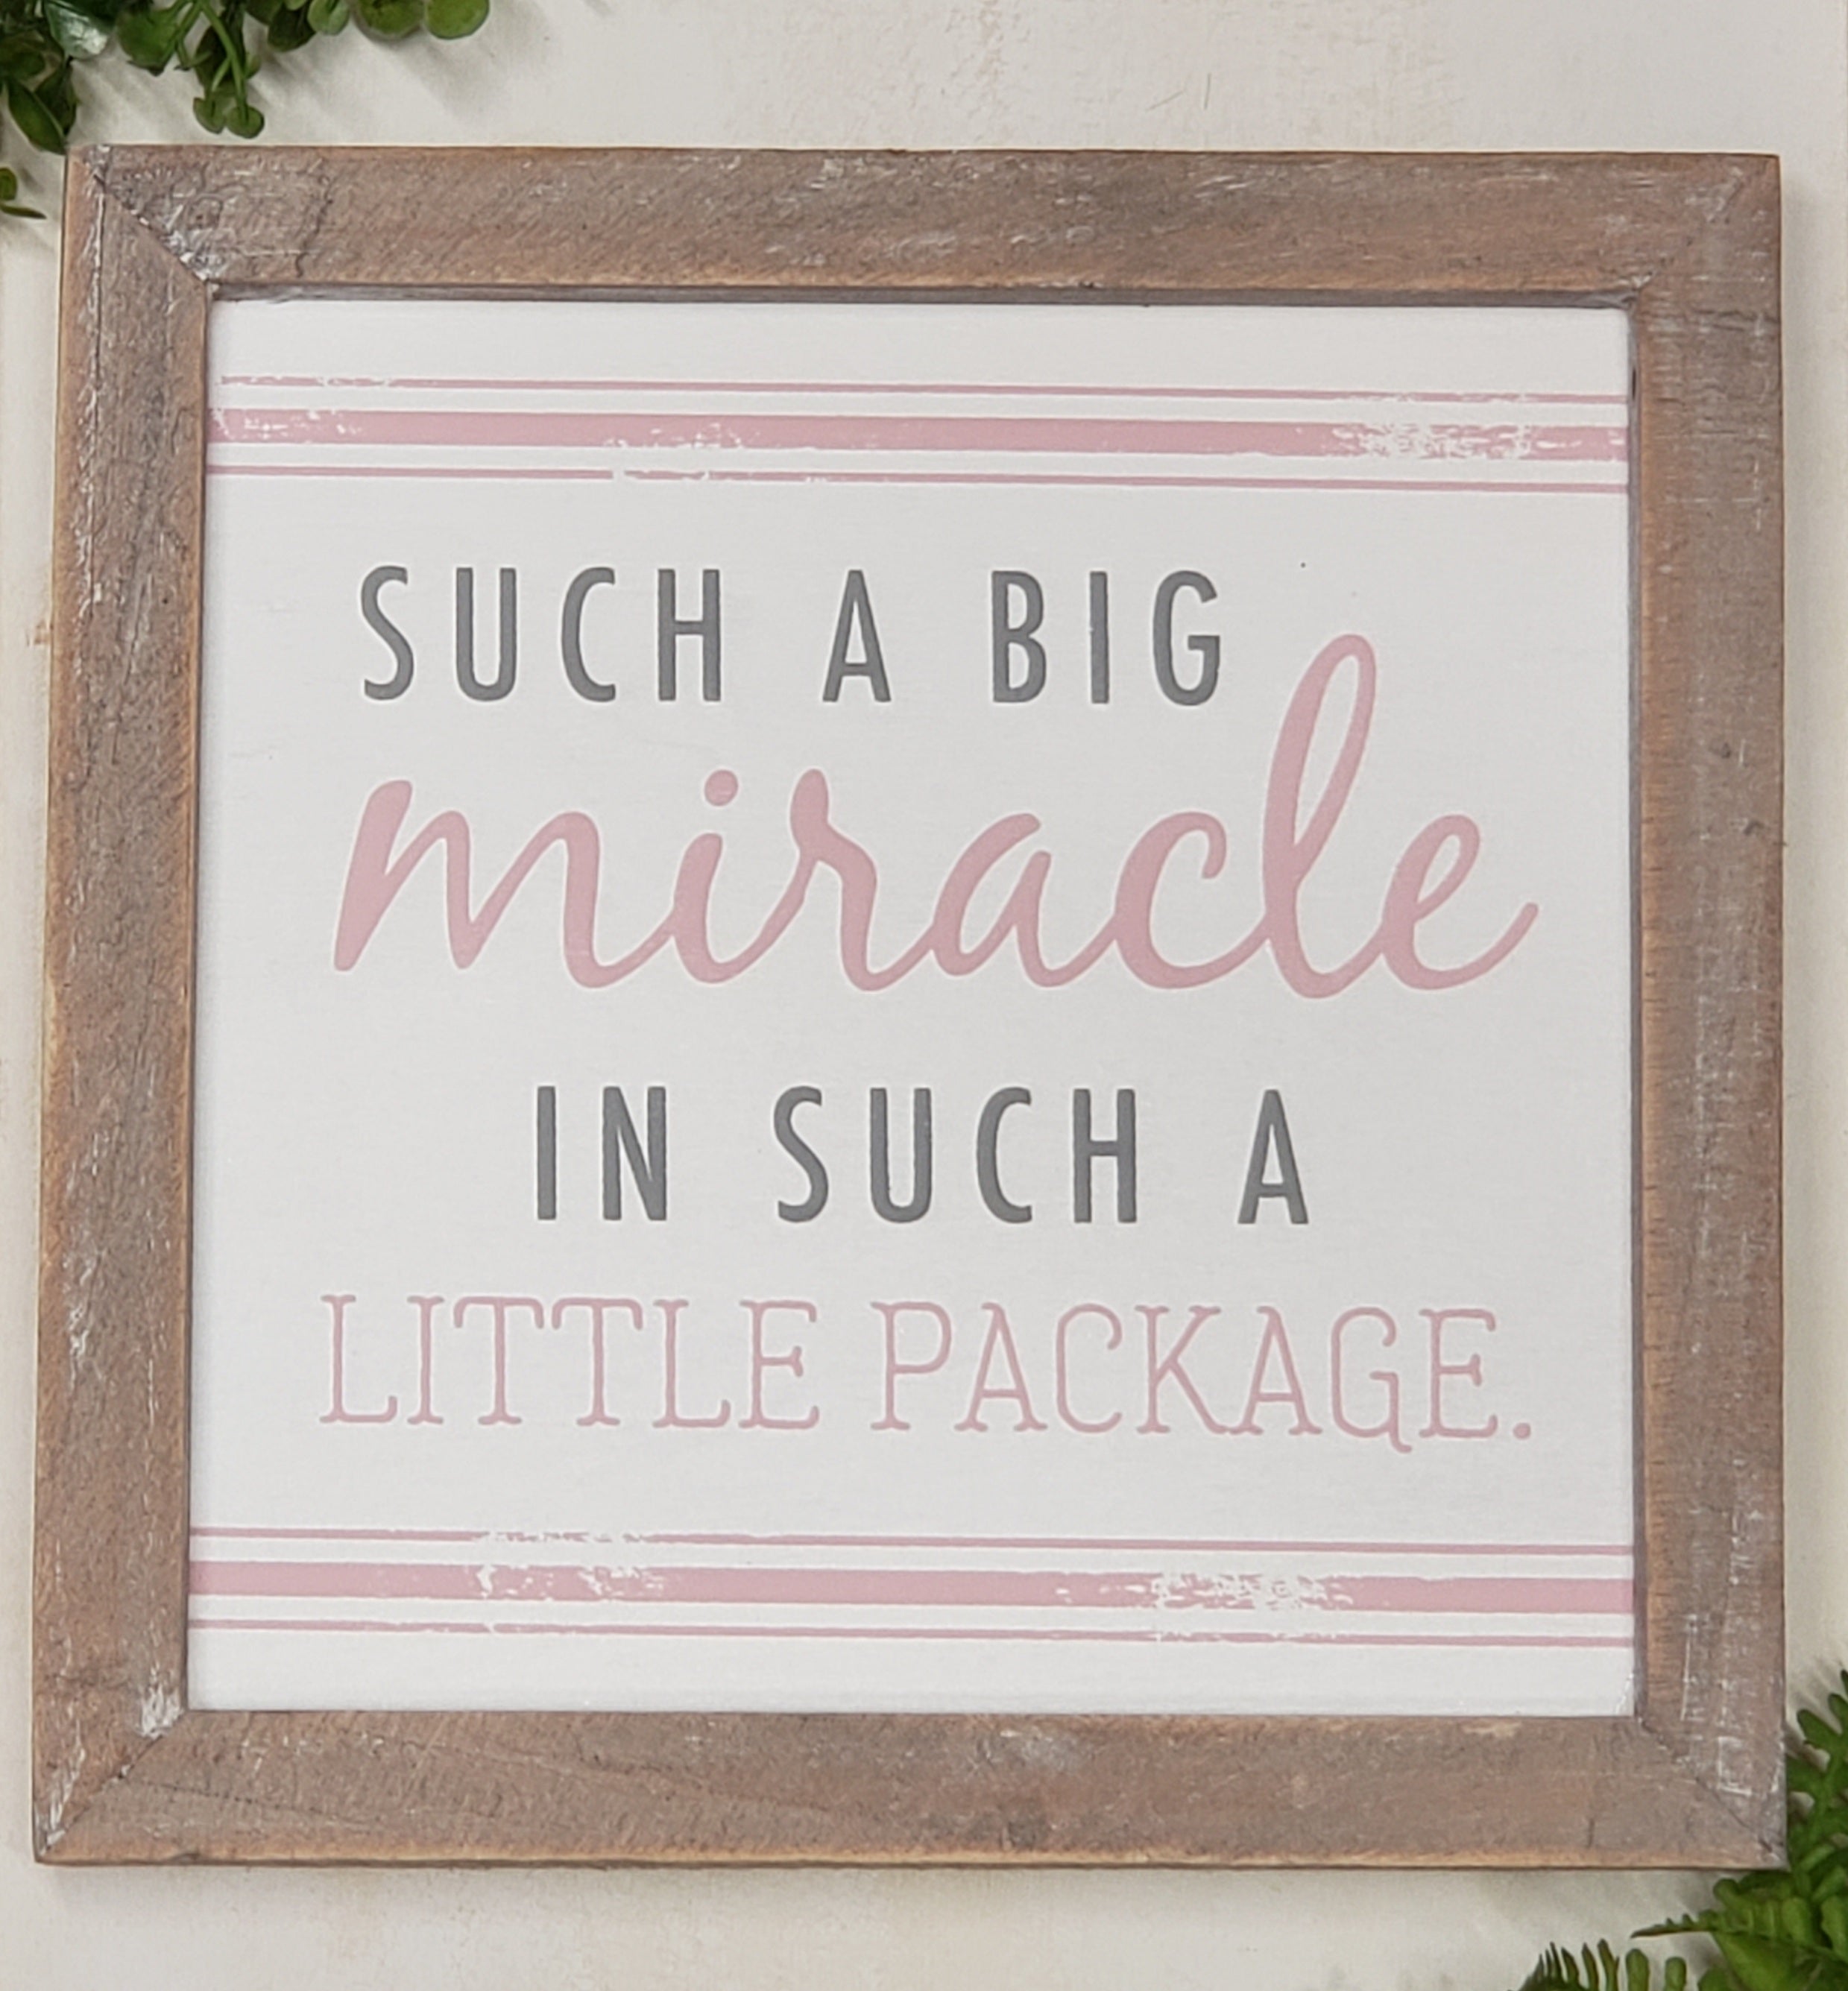 Such a big miracle in such a little package